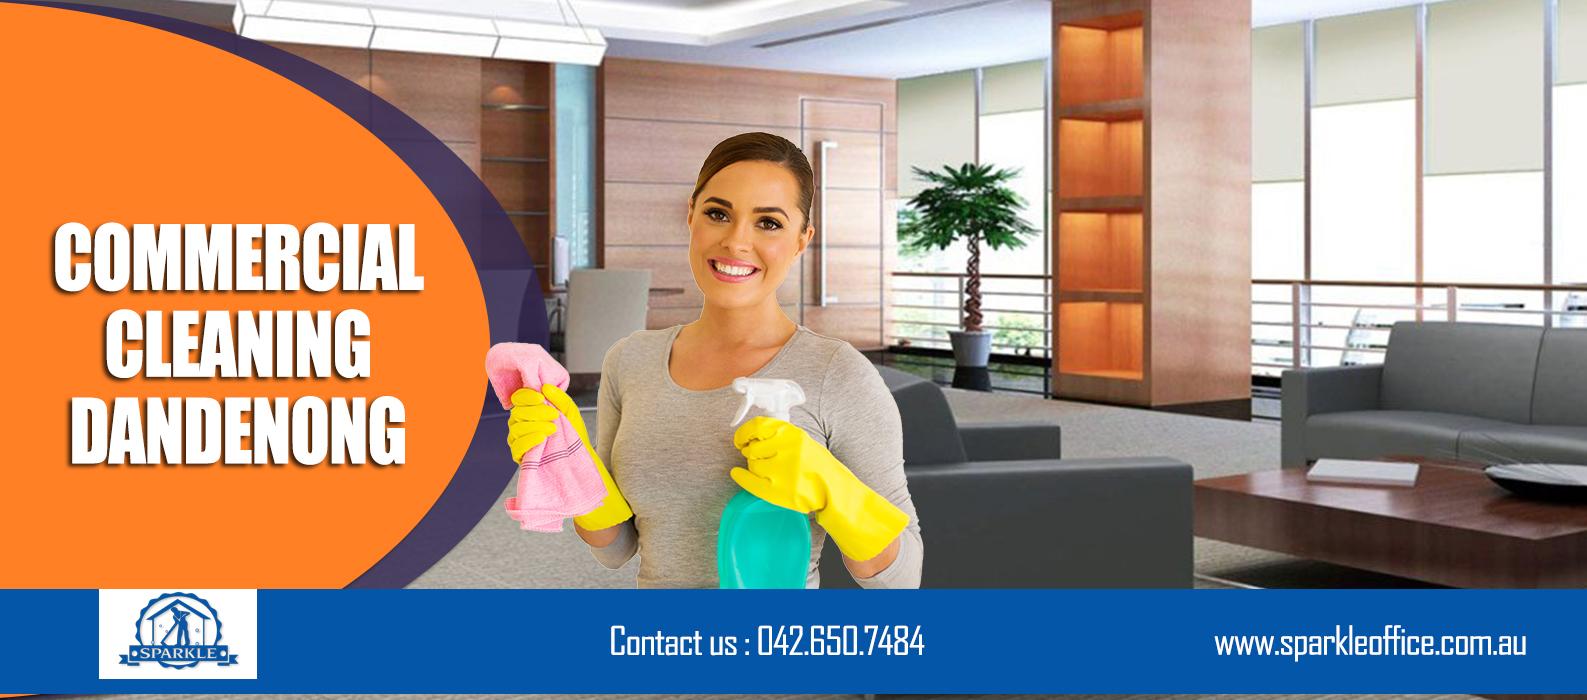 Commercial Cleaning Dandenong